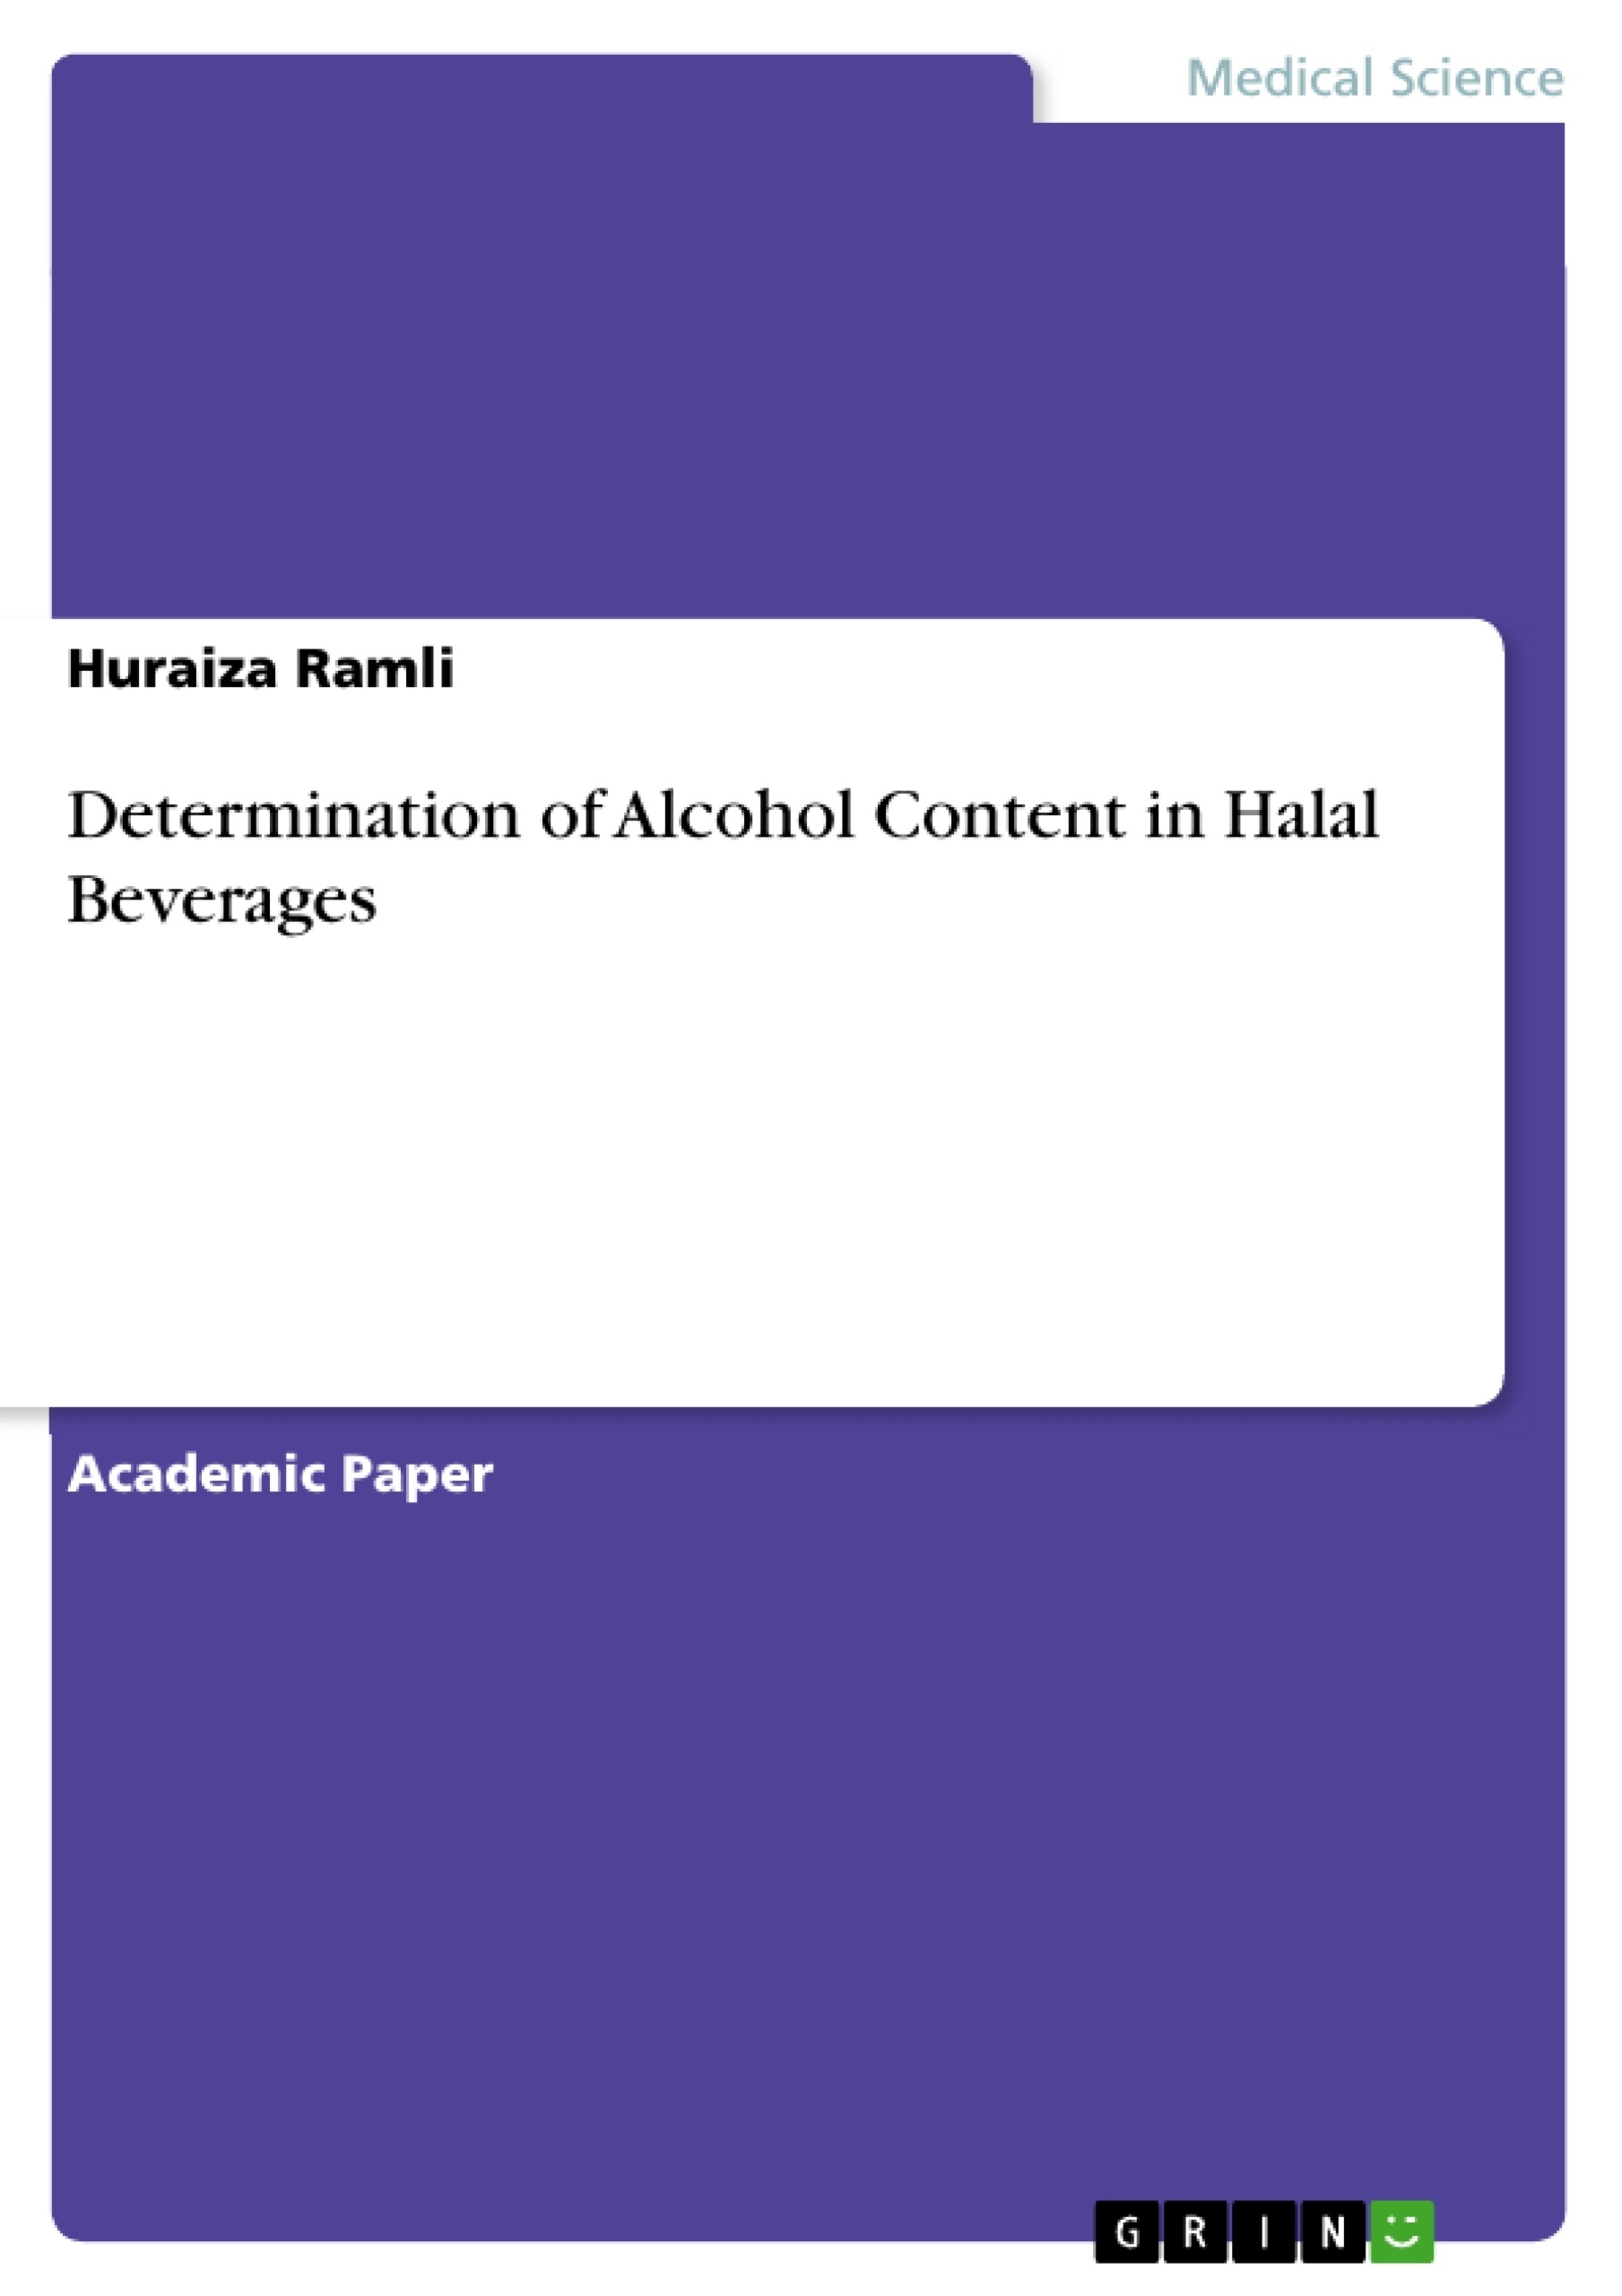 Título: Determination of Alcohol Content in Halal Beverages